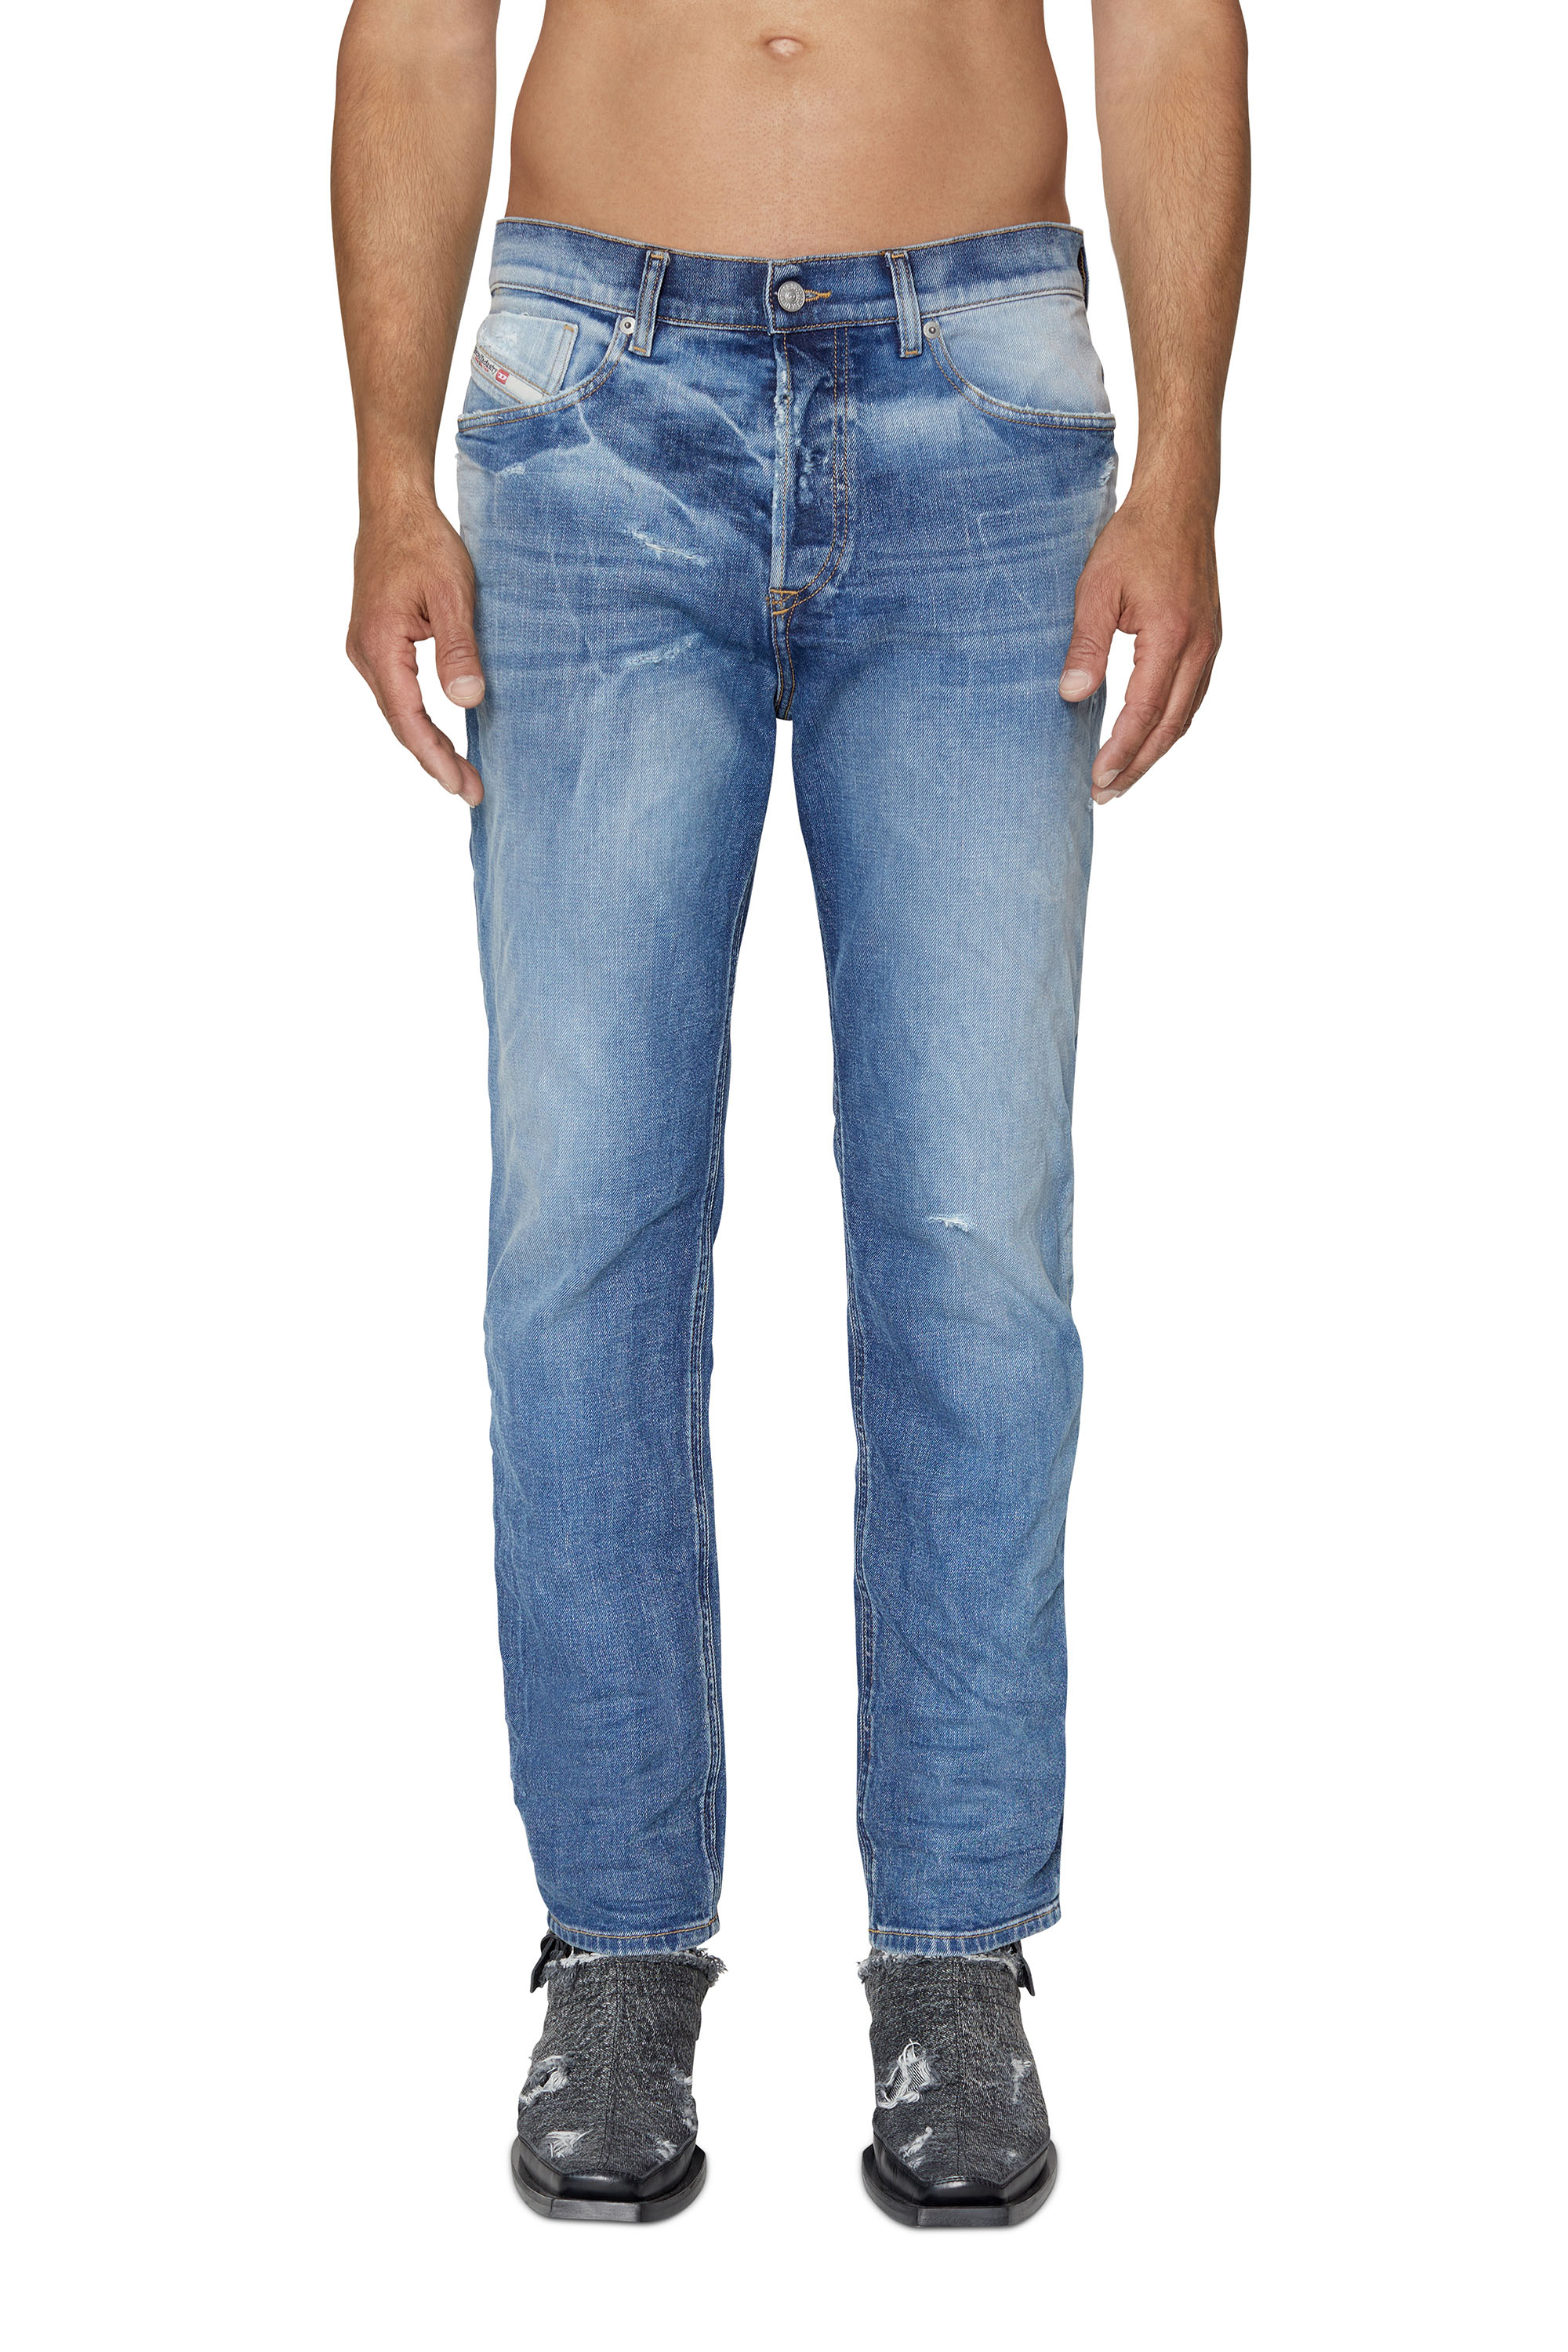 2005 D-FINING 09E16 Tapered Jeans, Blu medio - Jeans